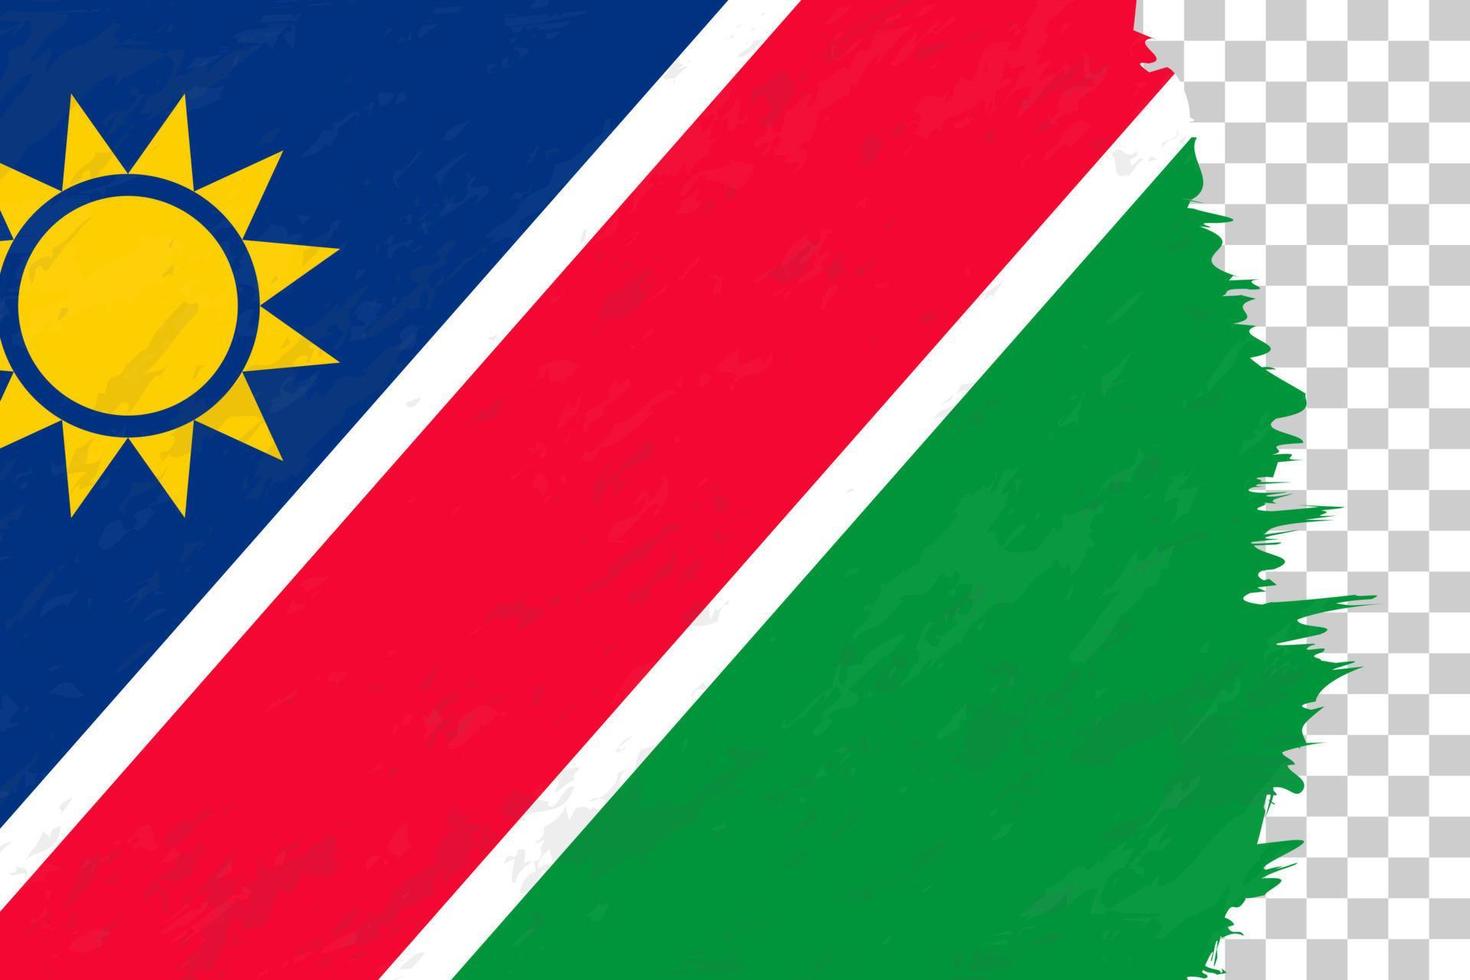 Horizontal Abstract Grunge Brushed Flag of Namibia on Transparent Grid. vector